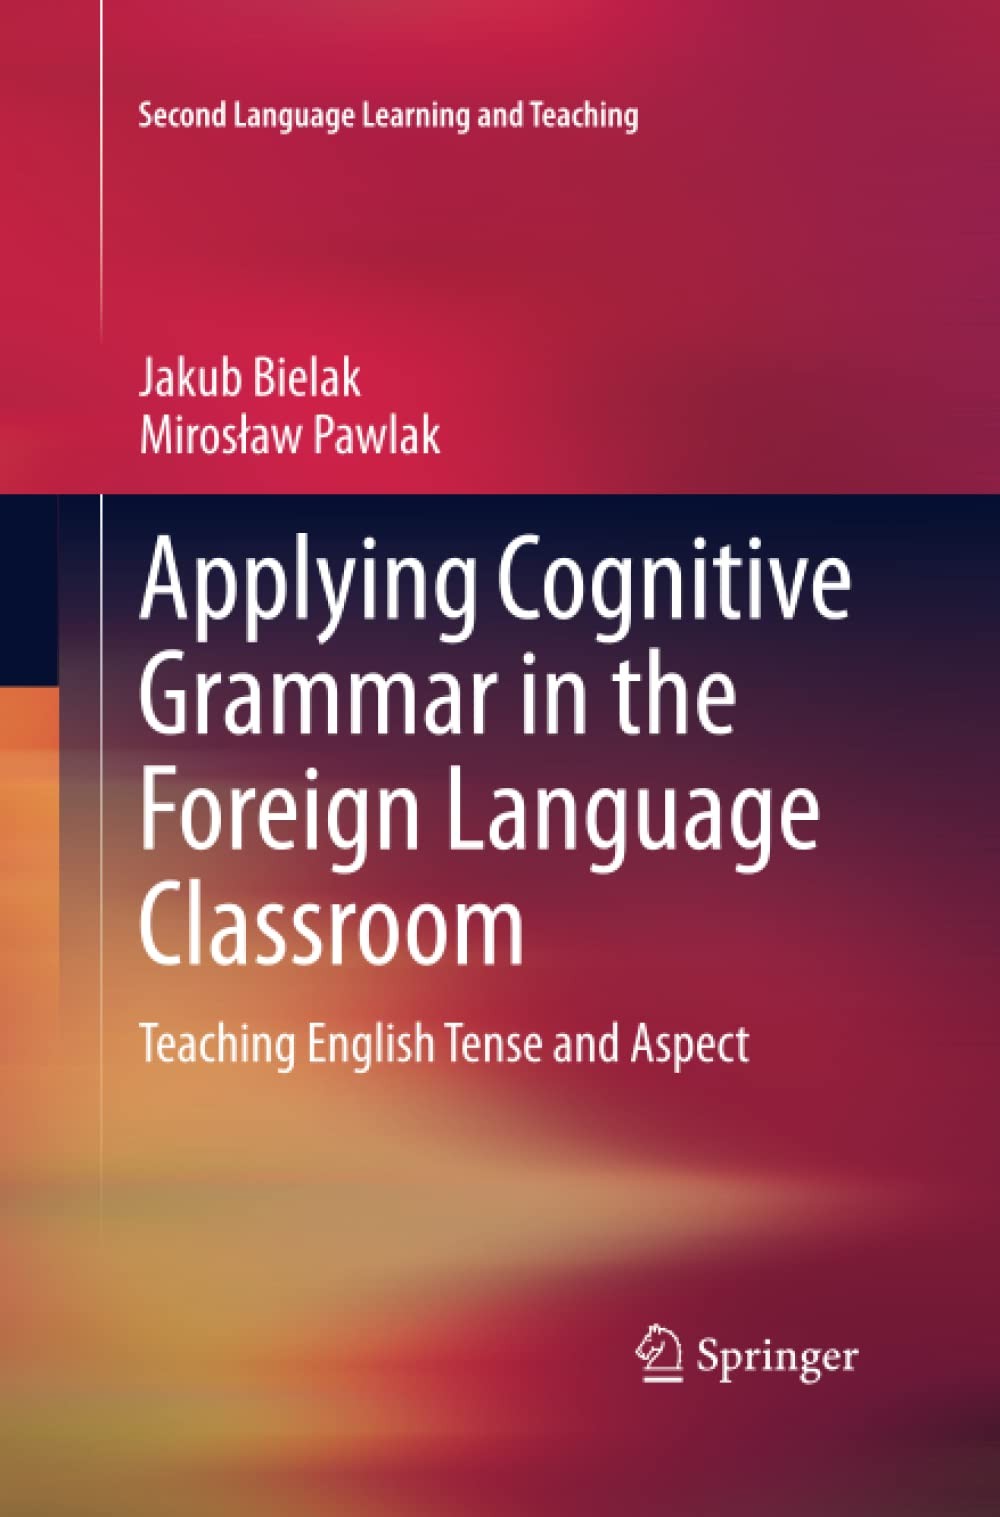 Applying Cognitive Grammar in the Foreign Language Classroom: Teaching English Tense and Aspect